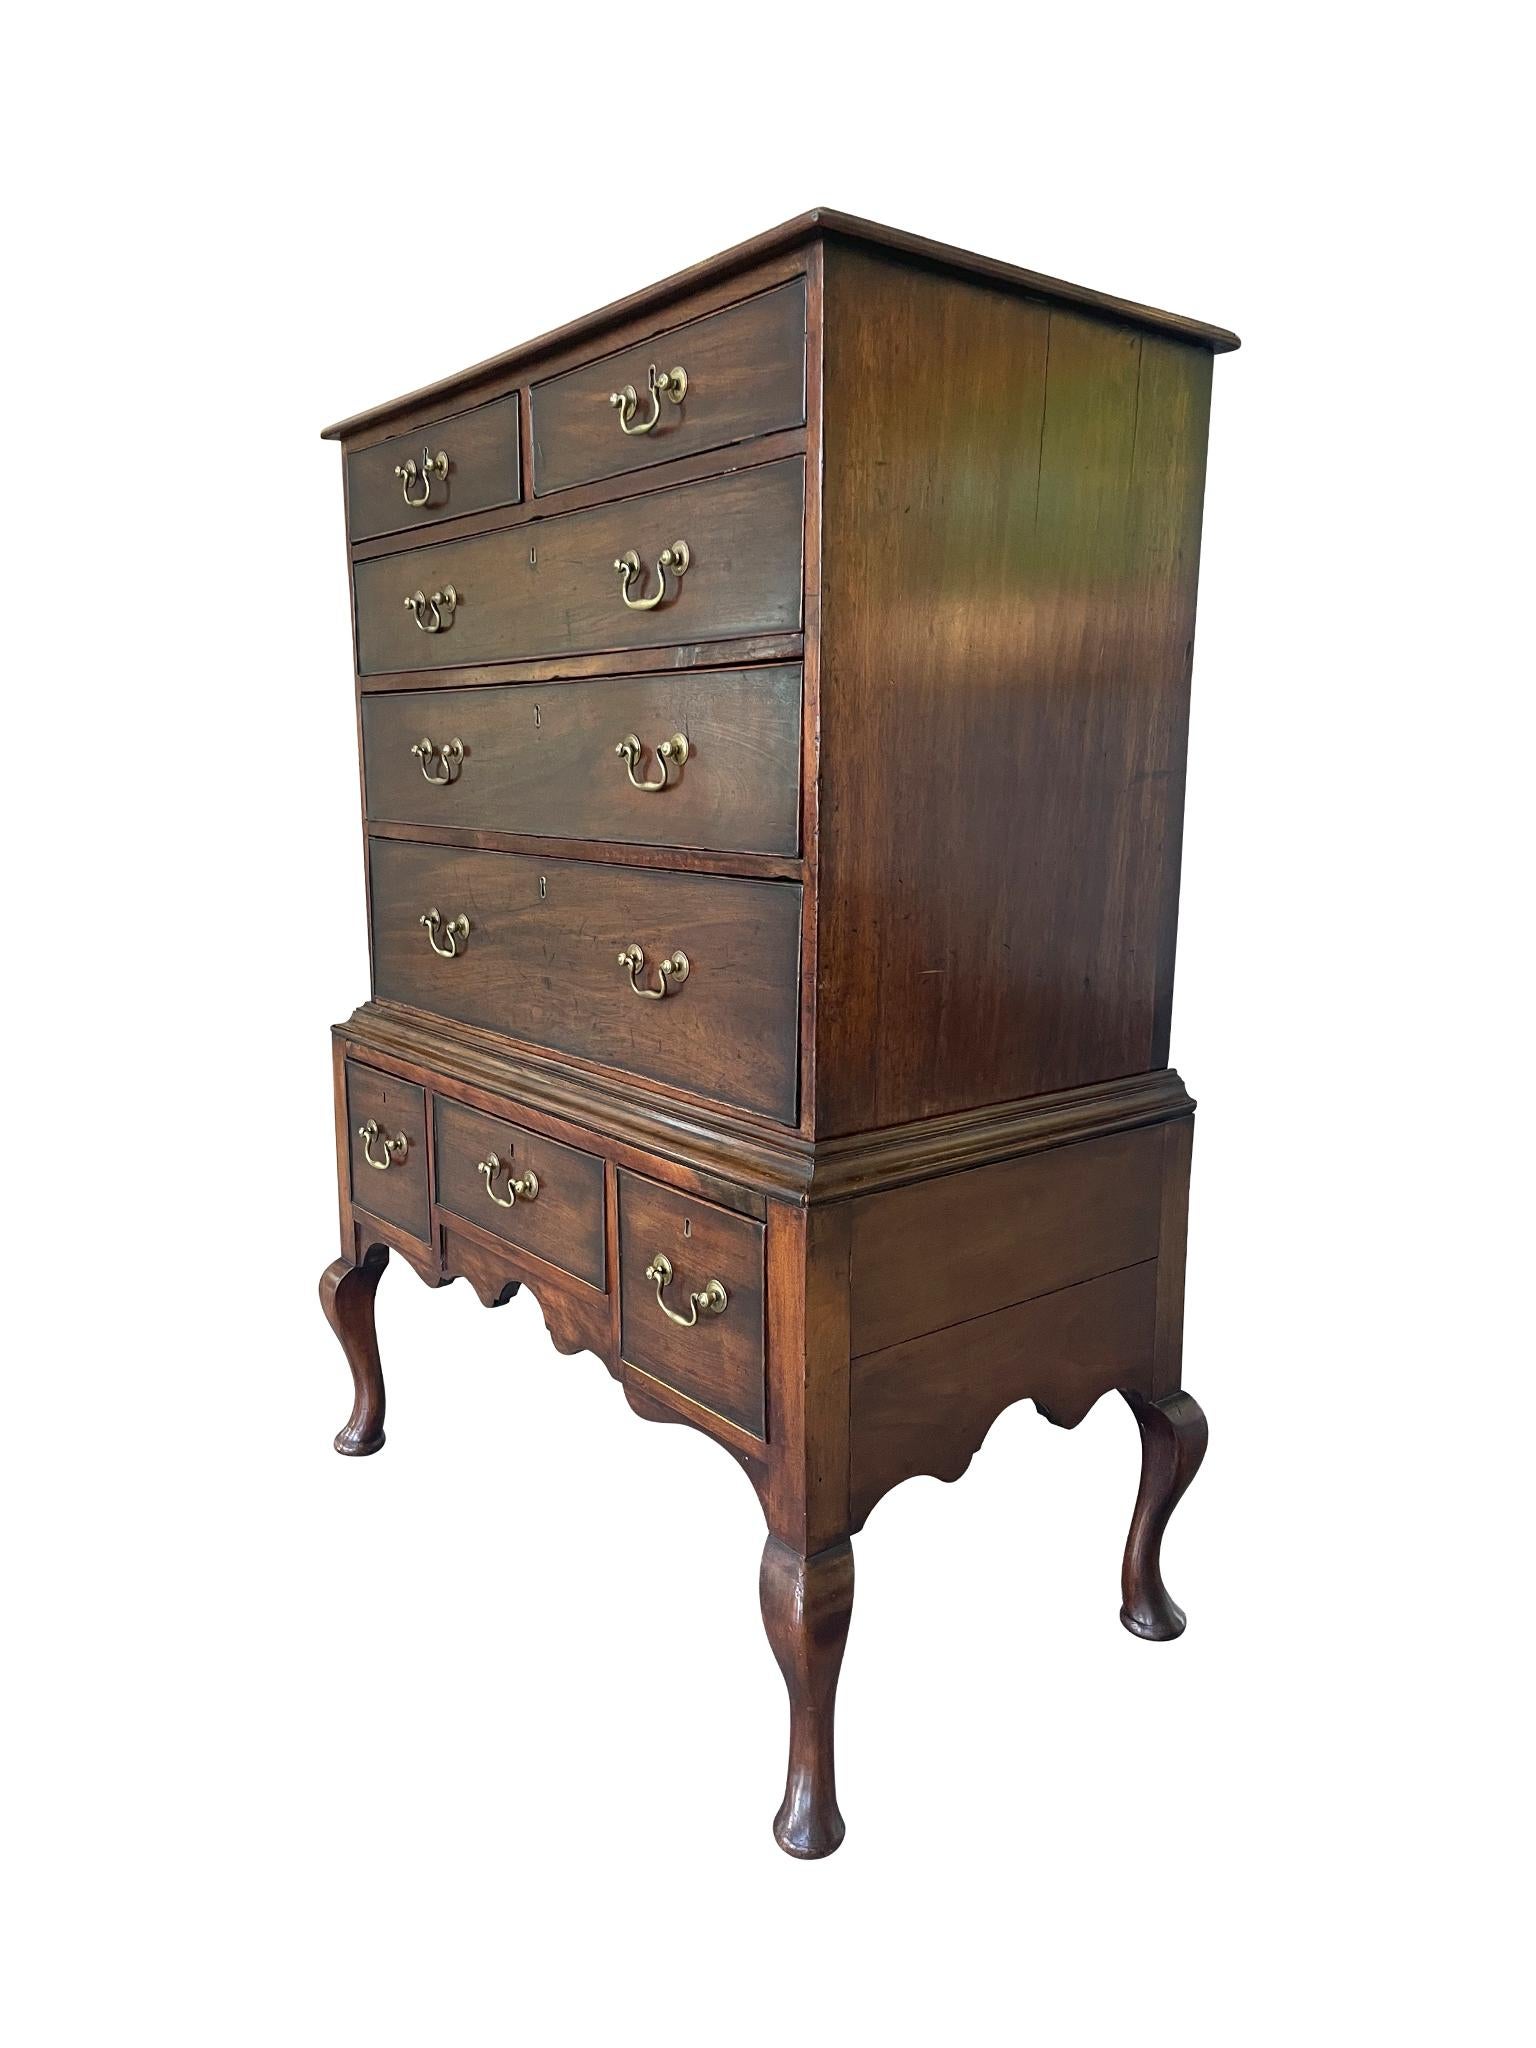 Hand-crafted in 1790, this George III highboy is comprised of mahogany with oak drawers. It has a two-part construction: an upper case piece with 2 small top drawers and 3 full-length drawers, and a lower case piece with 3 small drawers atop